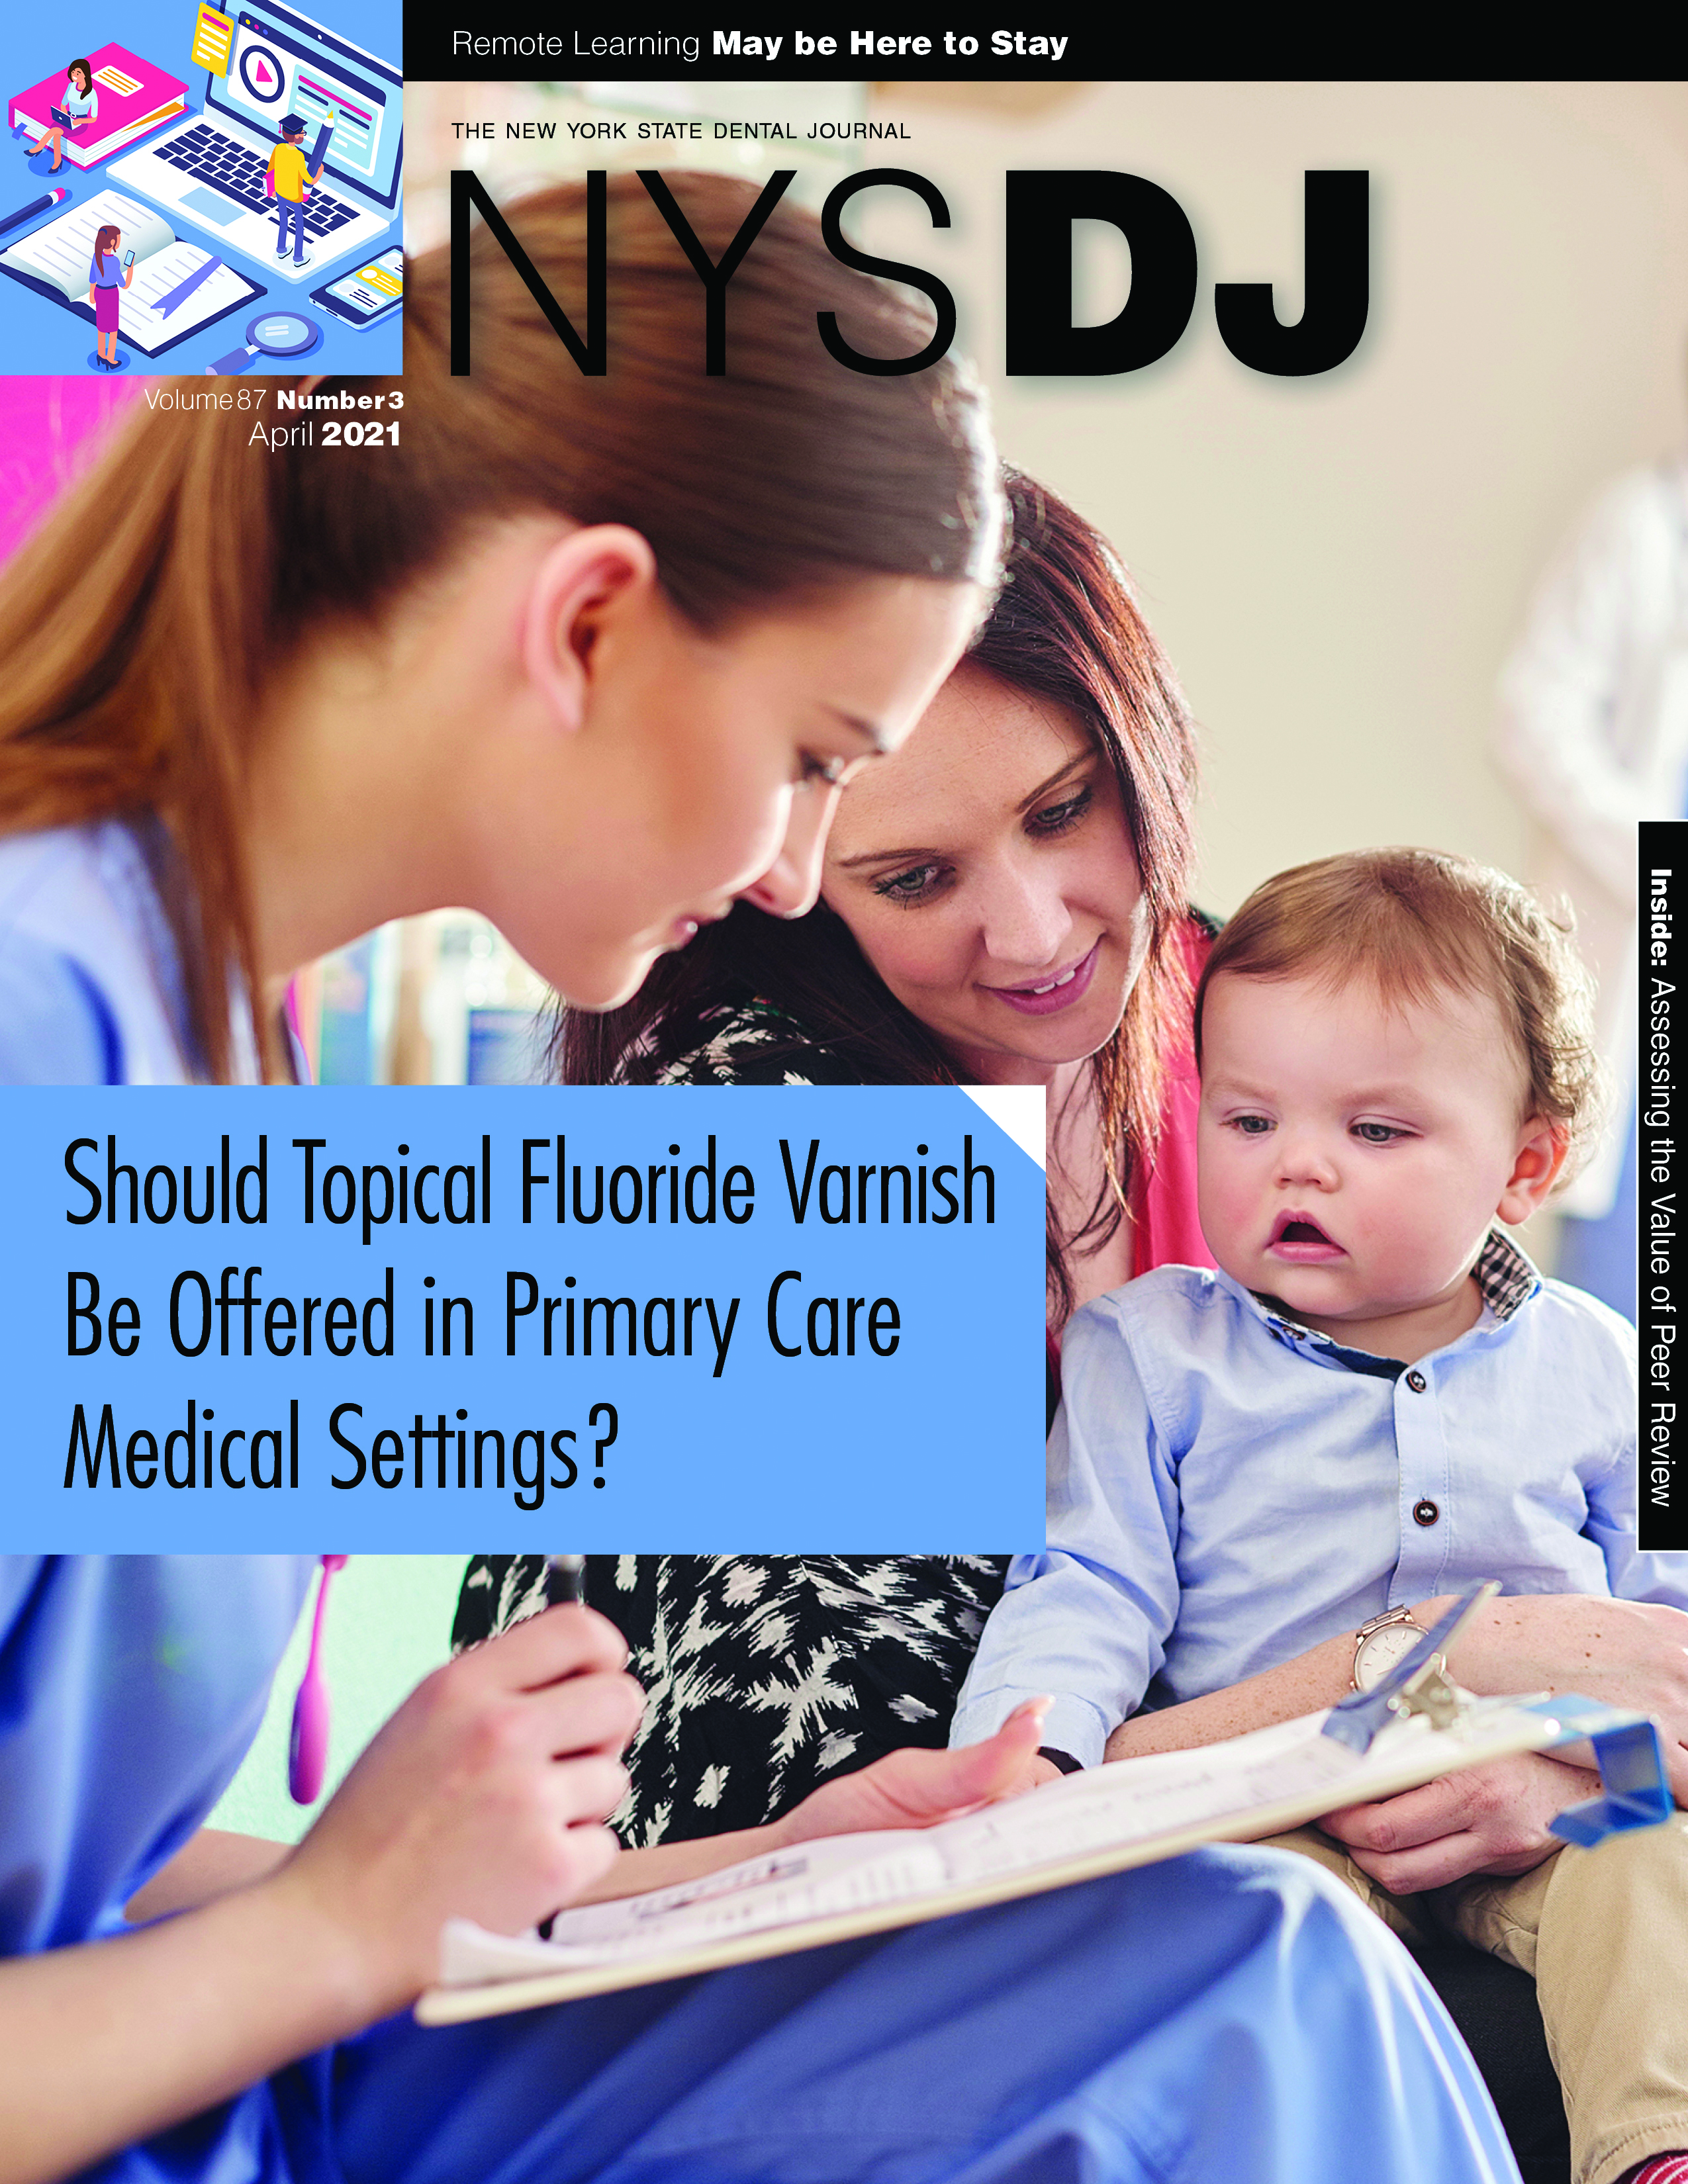 Cover of the NYSDJ with a baby looking at a clipboard in a dental office